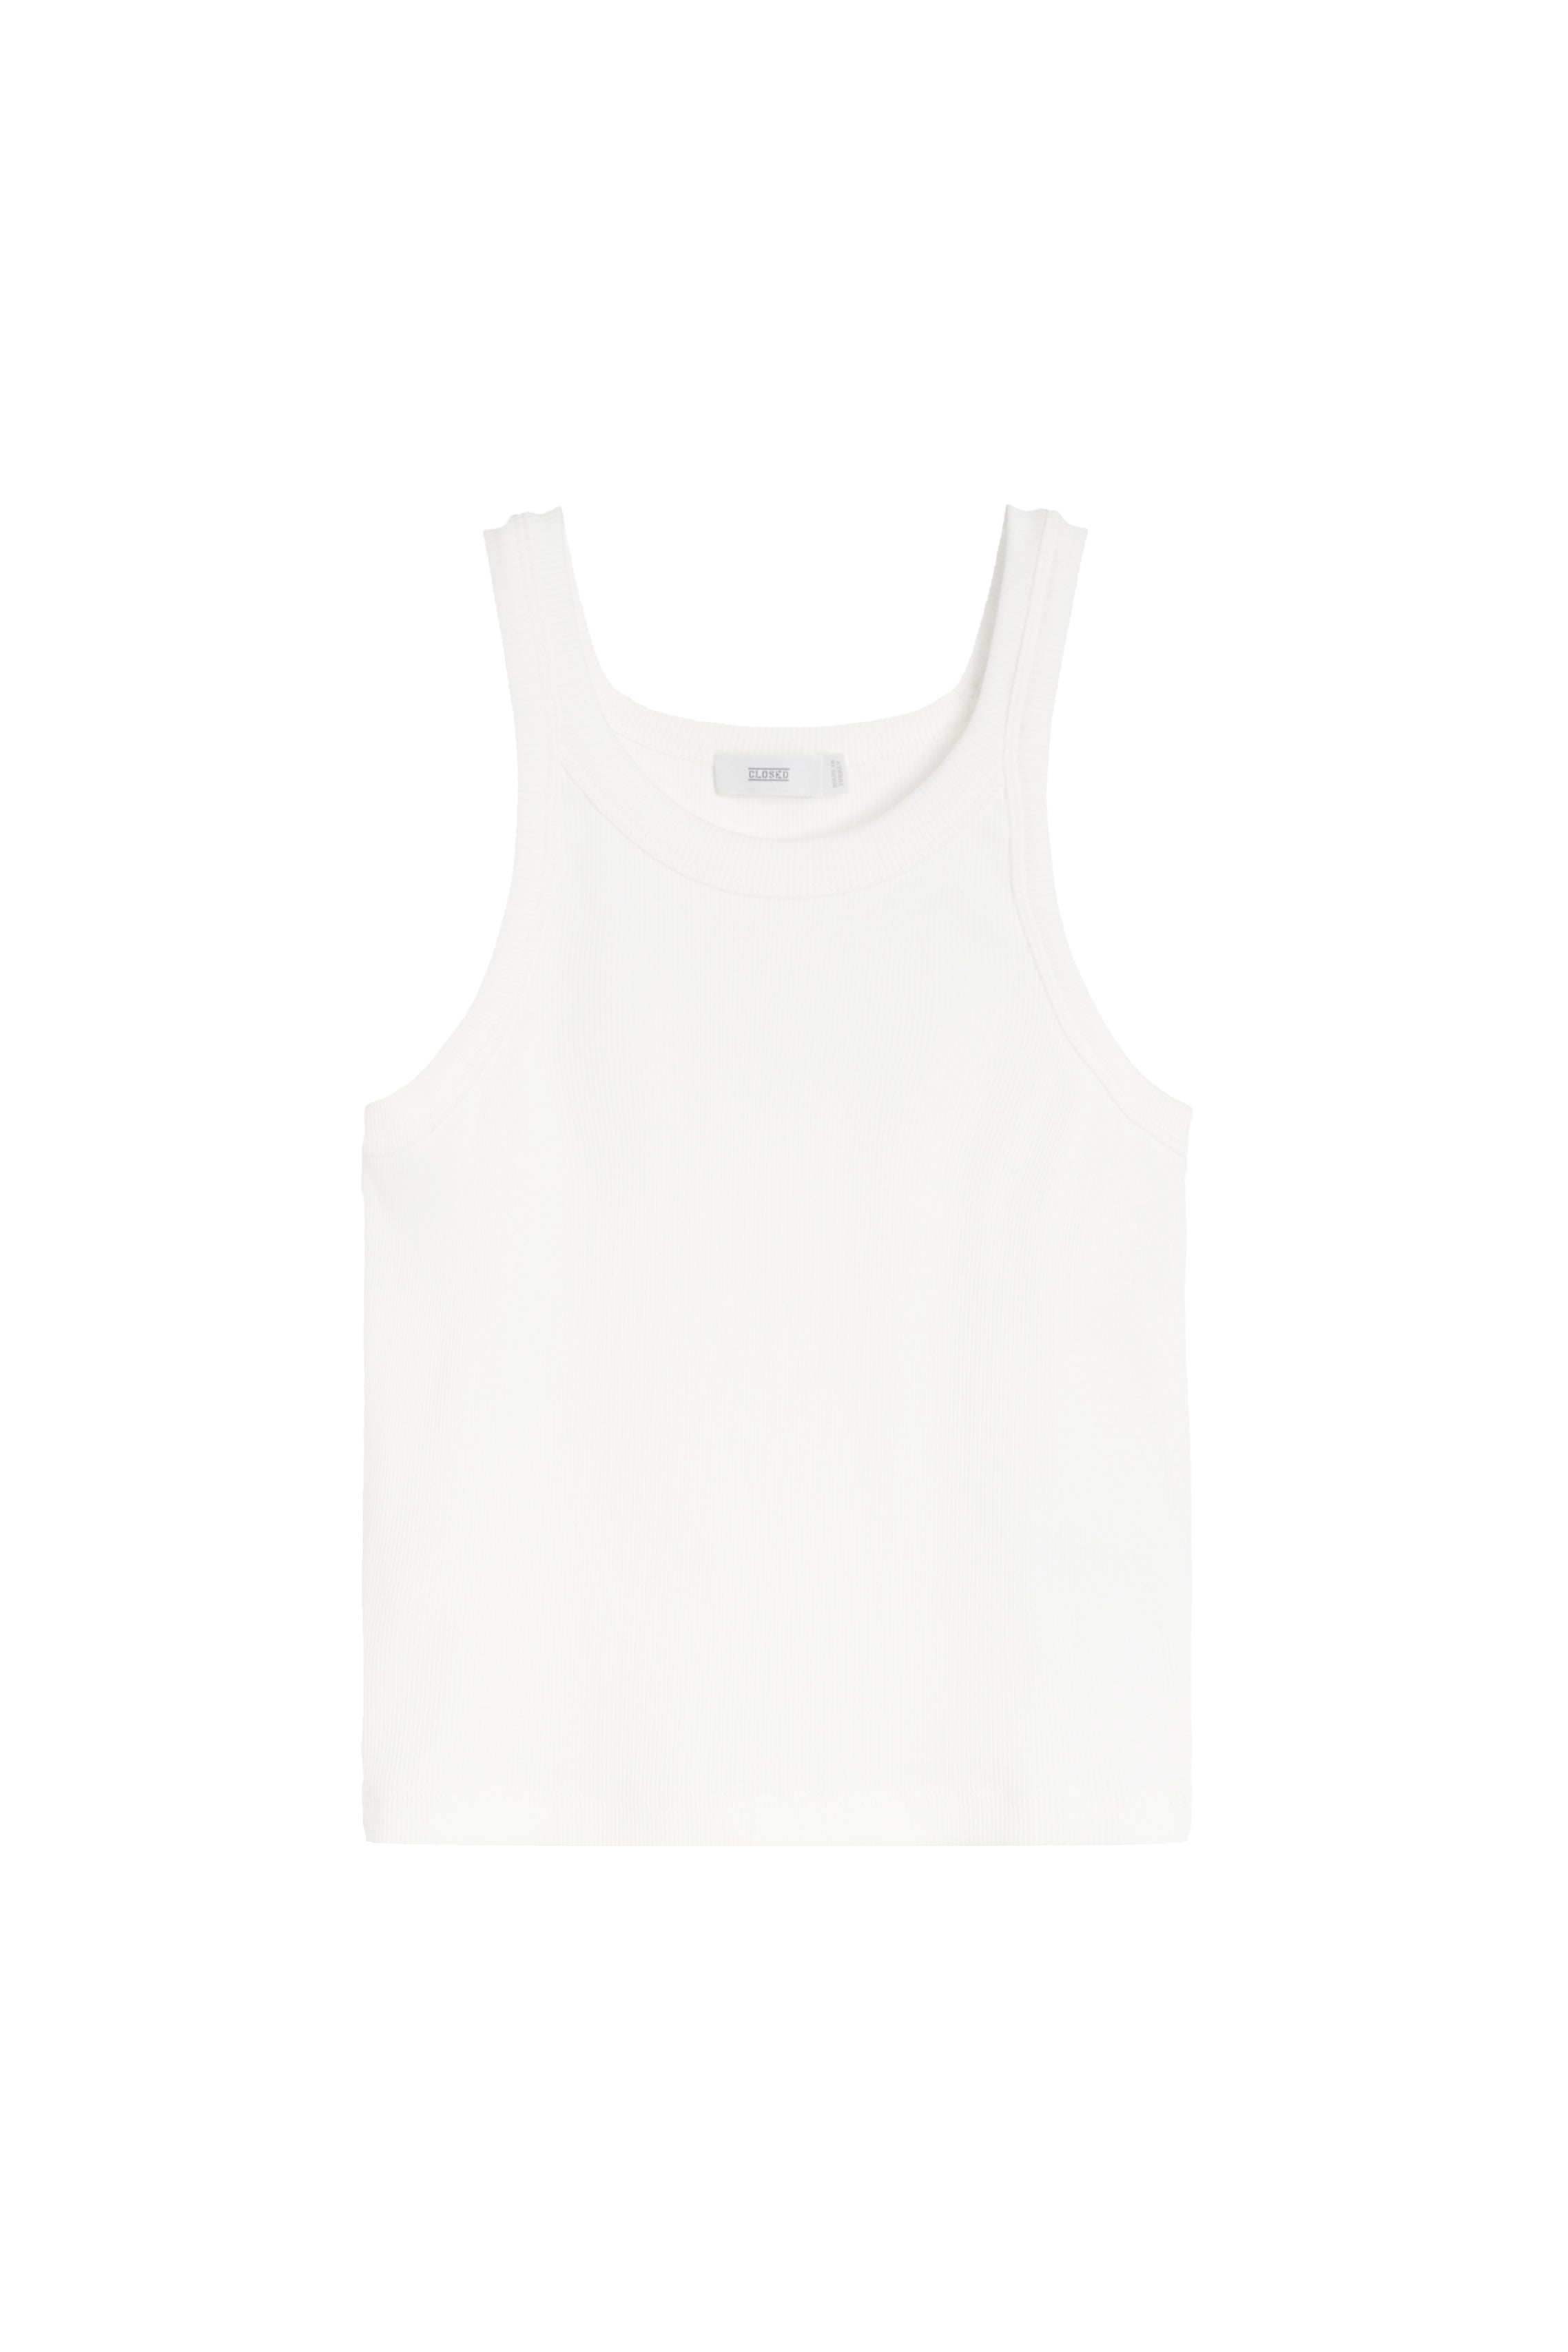 CLOSED-OUTLET-SALE-CROPPED-TANK-TOP-T-SHIRTS-Shirts-ARCHIVE-COLLECTION.jpg